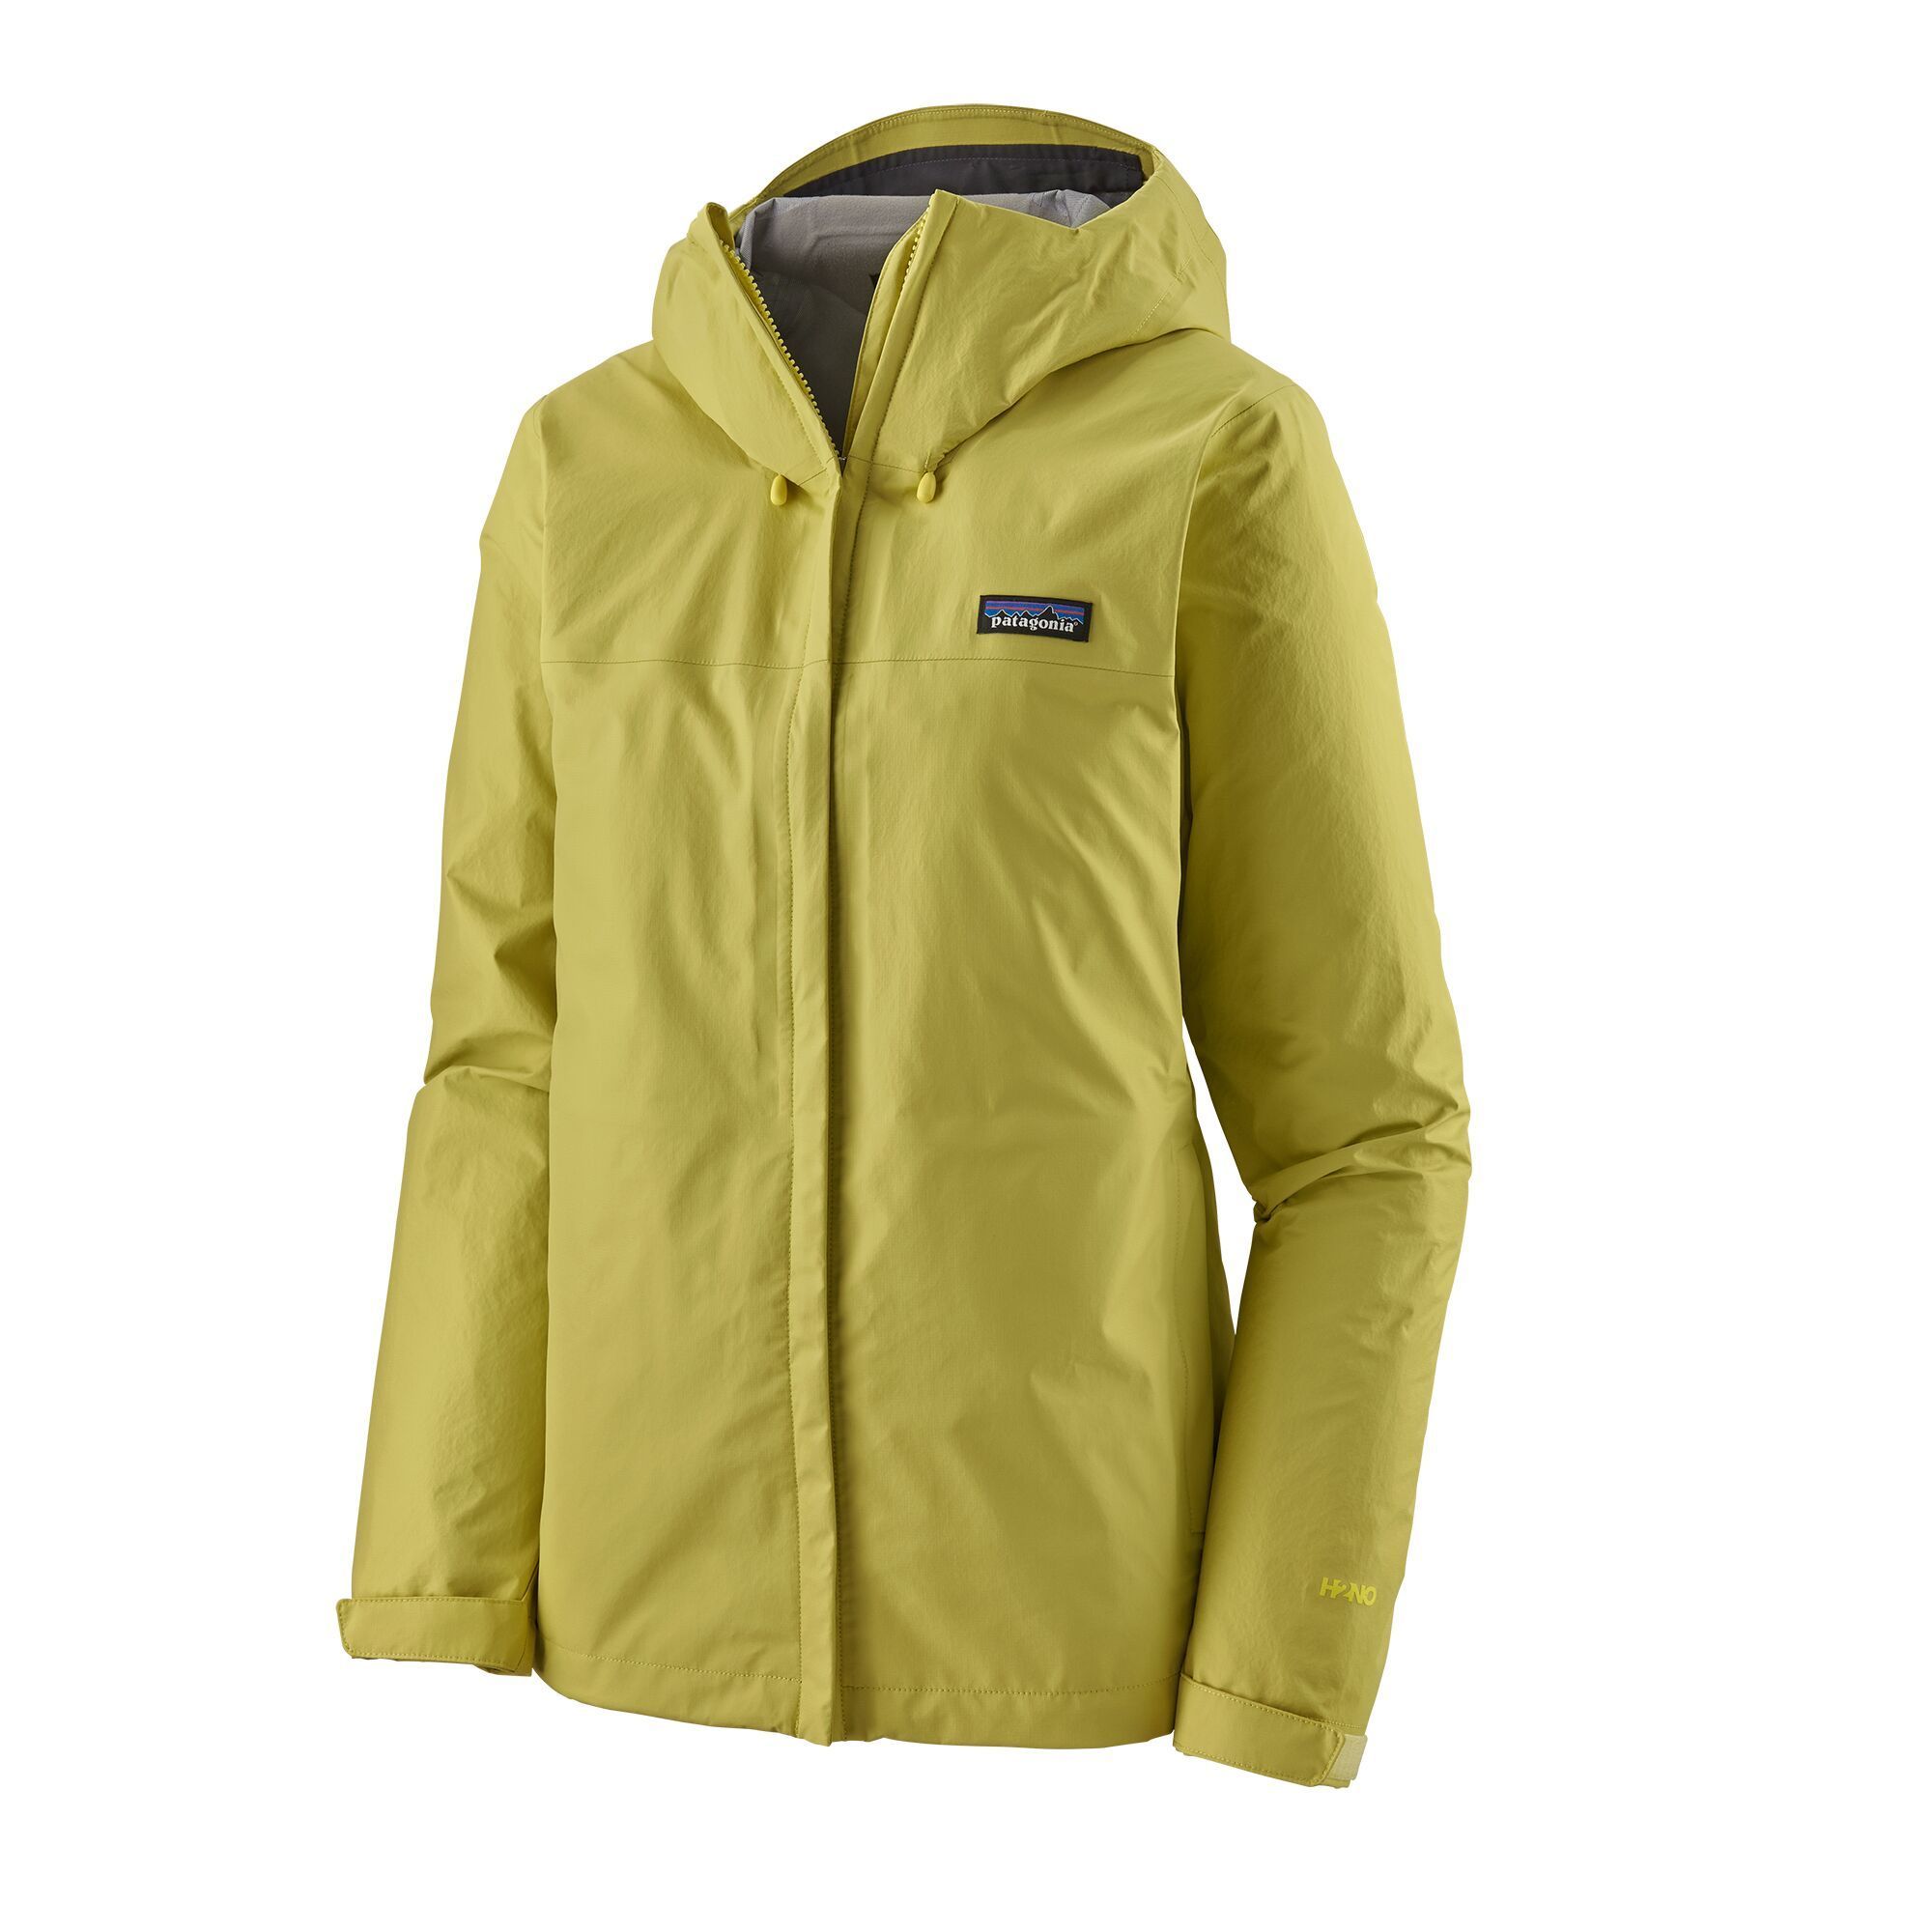 Patagonia Women's Torrentshell 3-layer Jacket - 100% Recycled Nylon, Pineapple / S